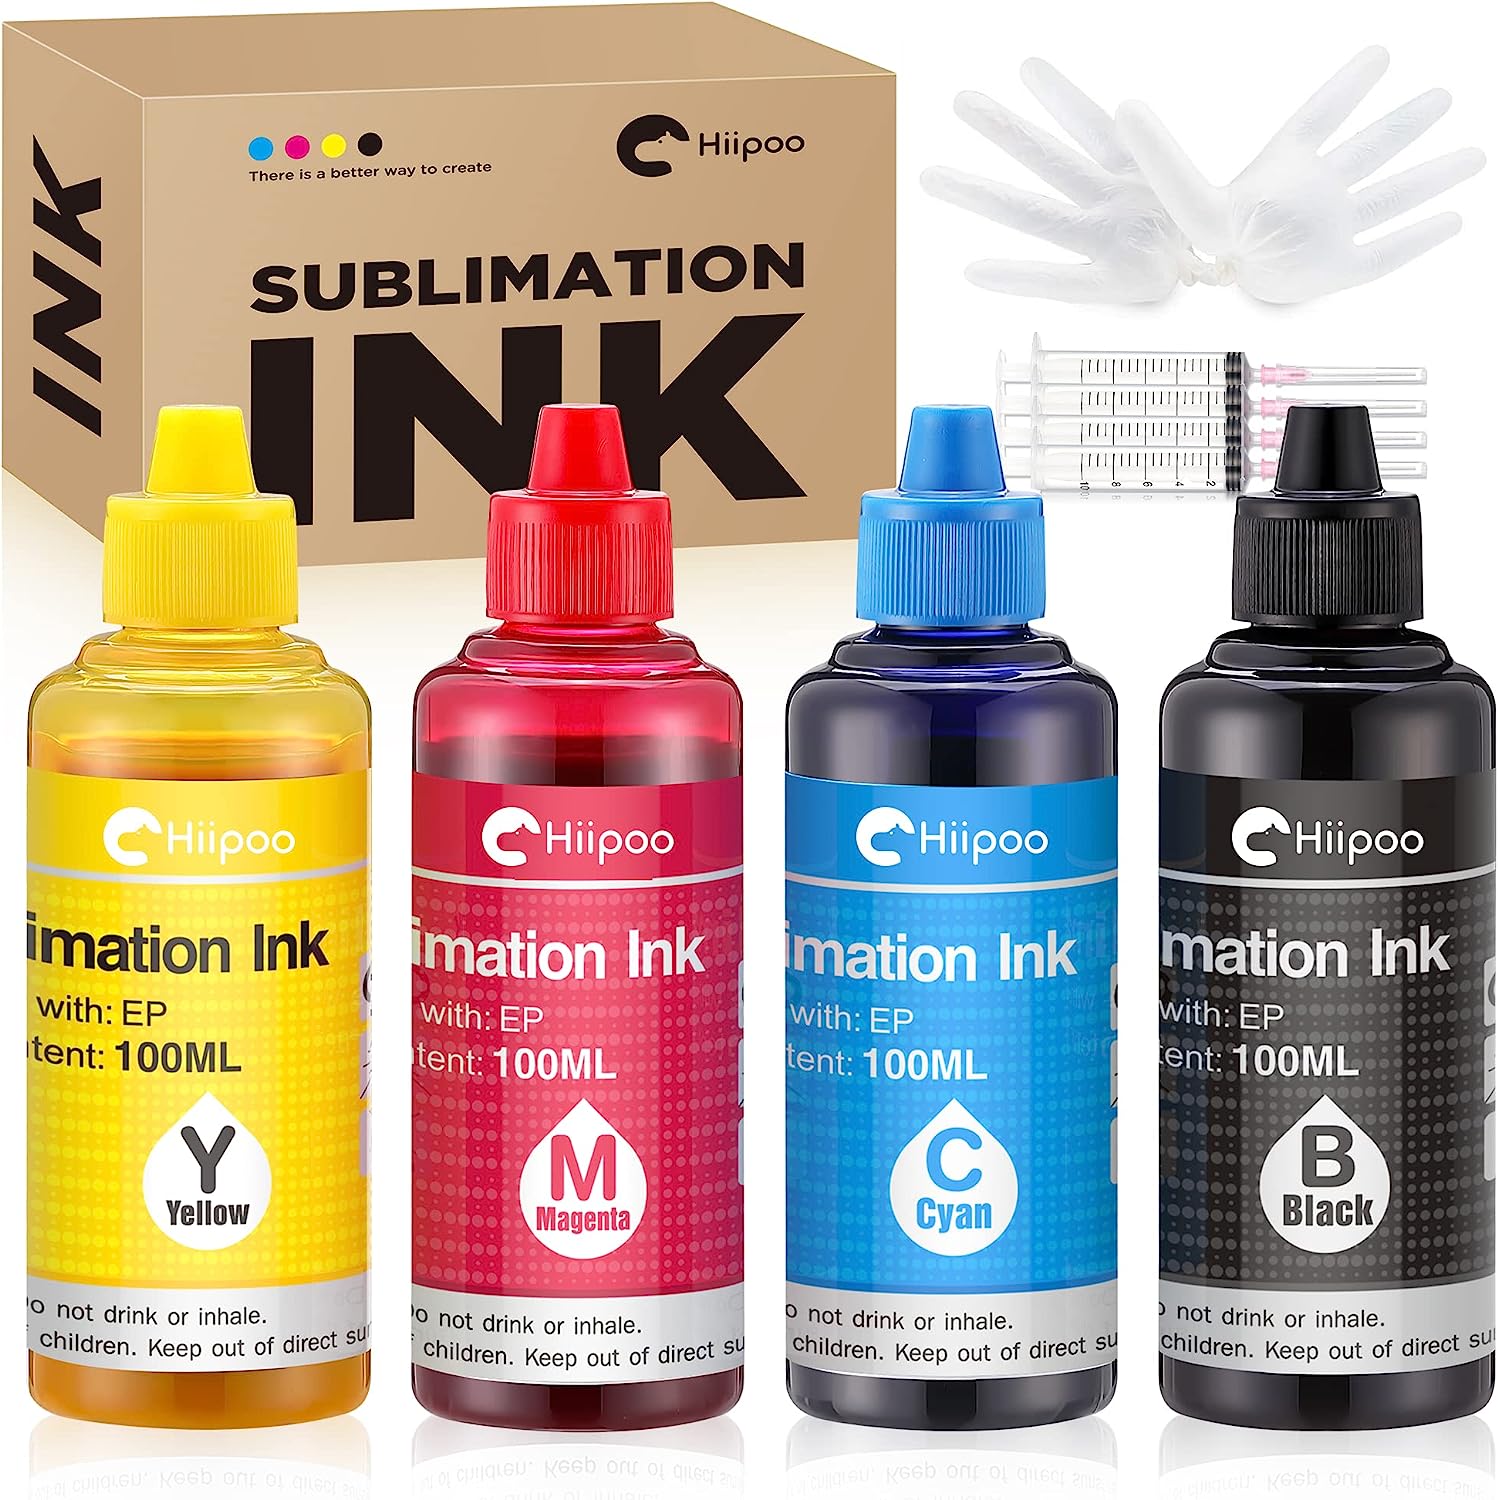 Hiipoo Sublimation Ink Refilled Bottles Work with [...]